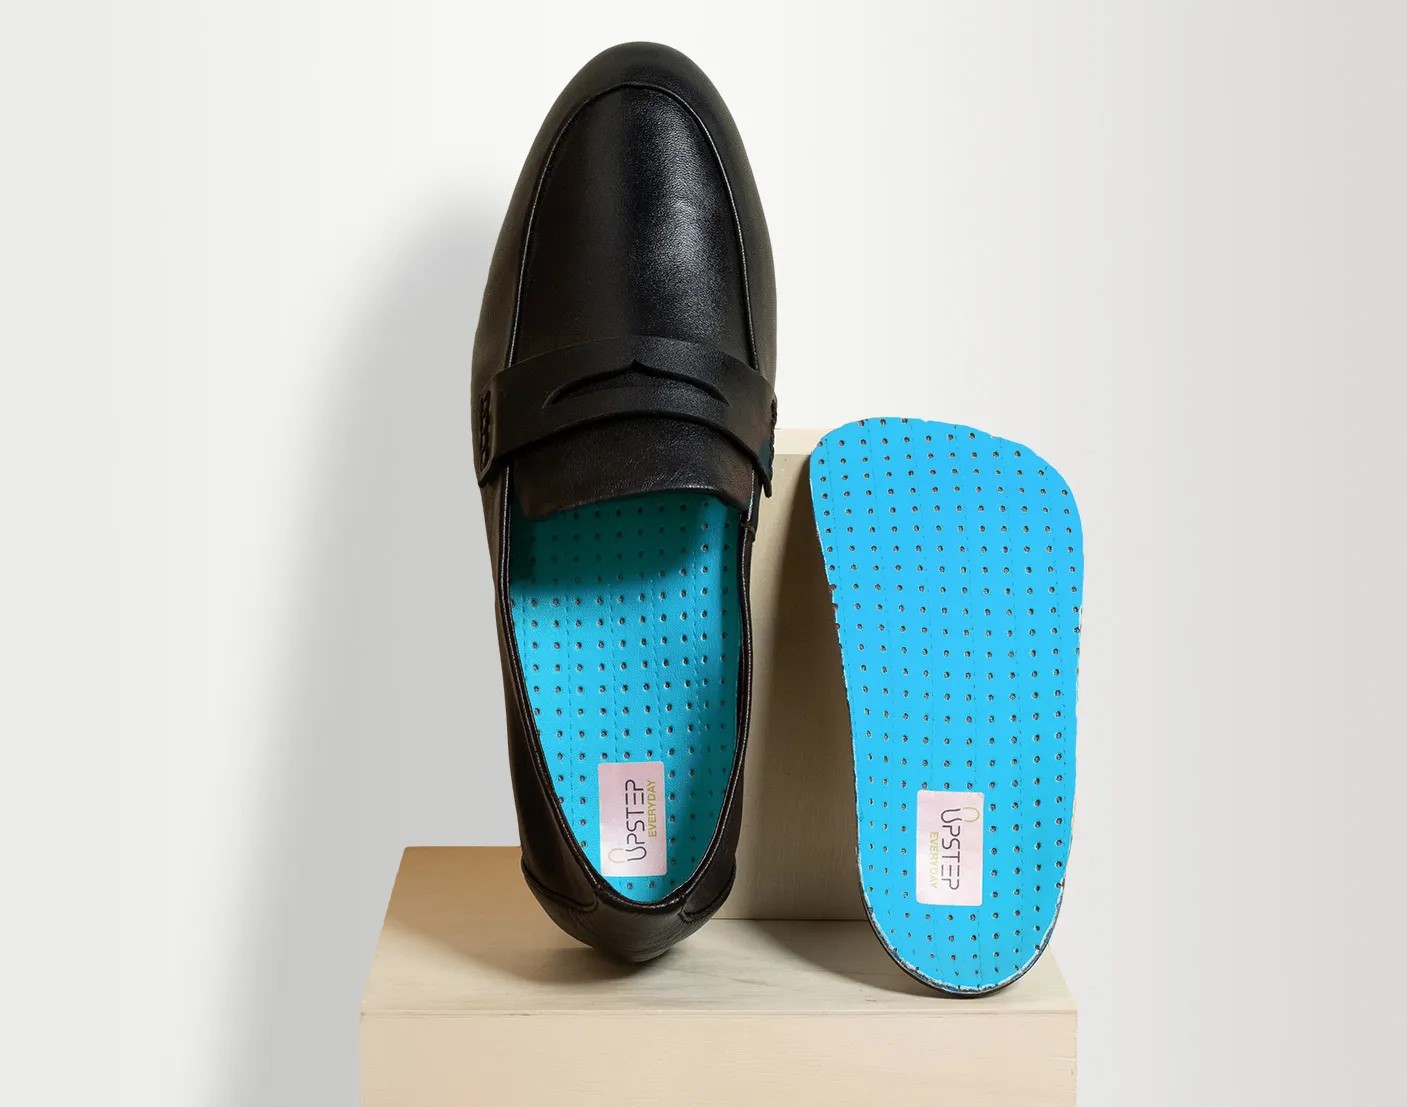 Upstep custom orthotics displayed vertically , one insole inside a formal shoe and the other outside